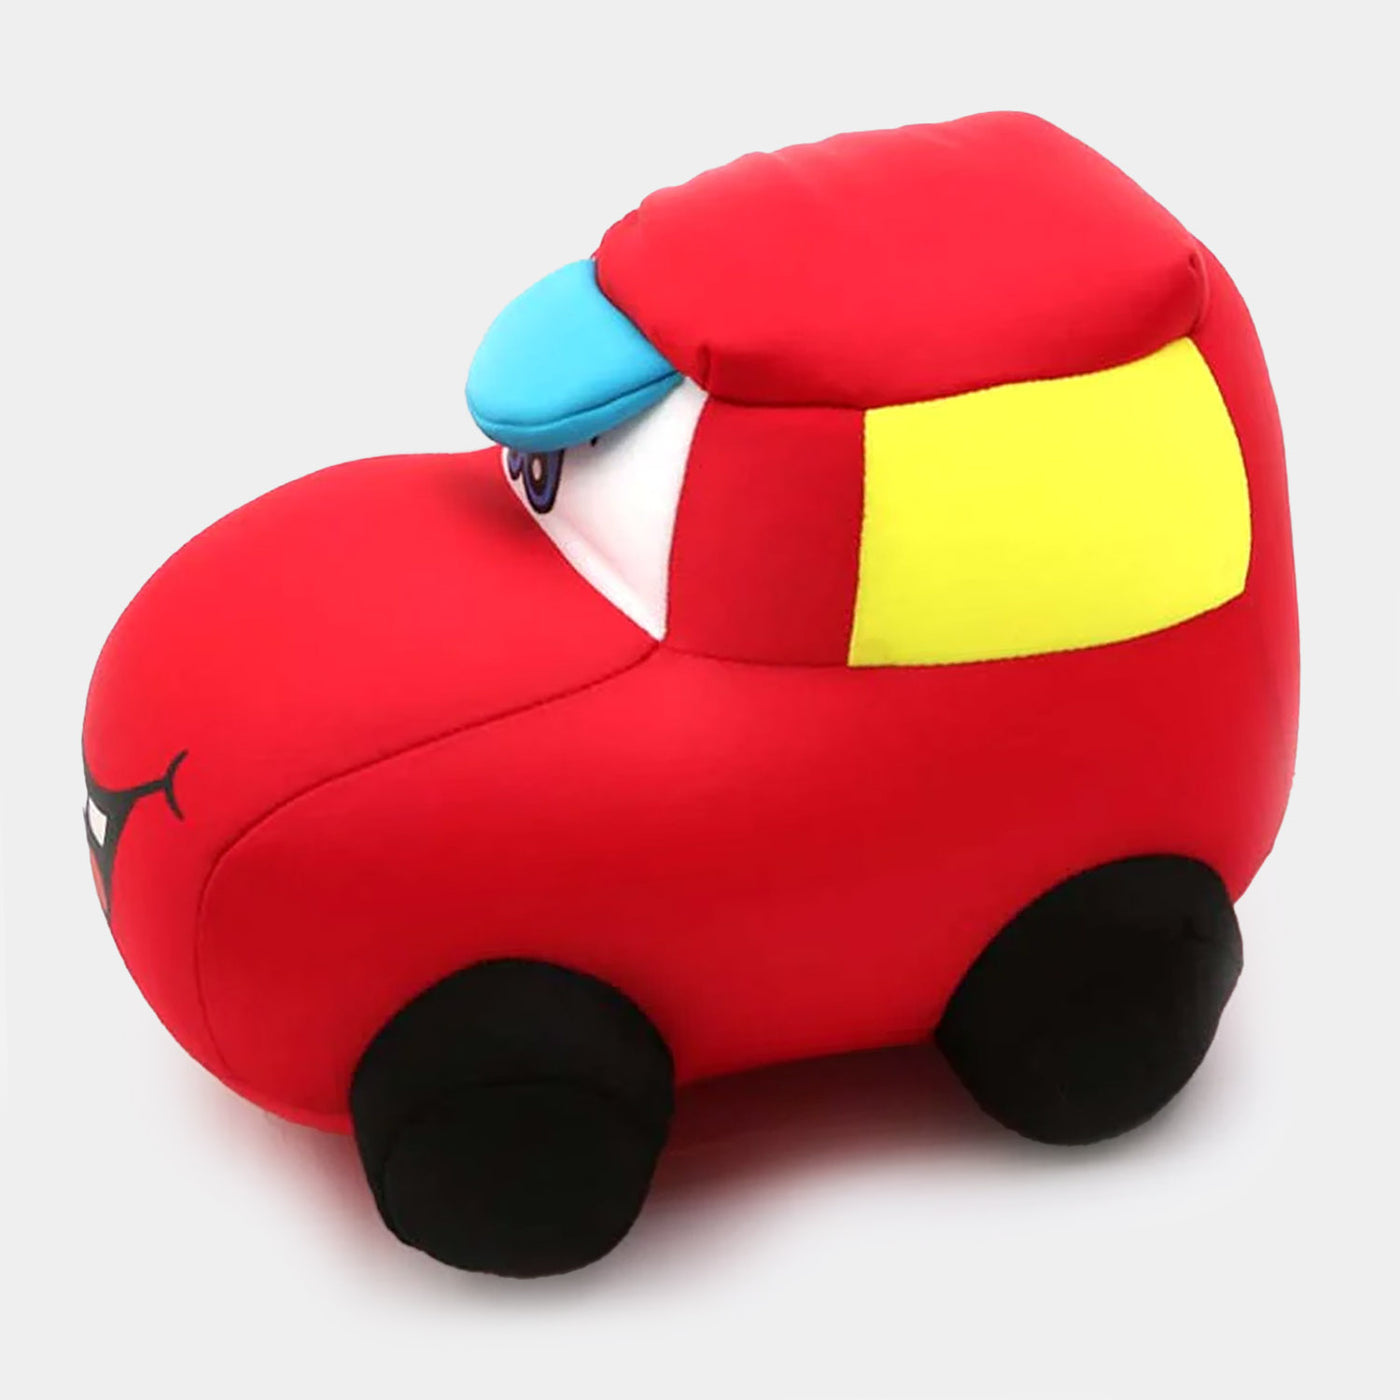 Soft Beans Car Toy For Kids Small - Red (SB-08)